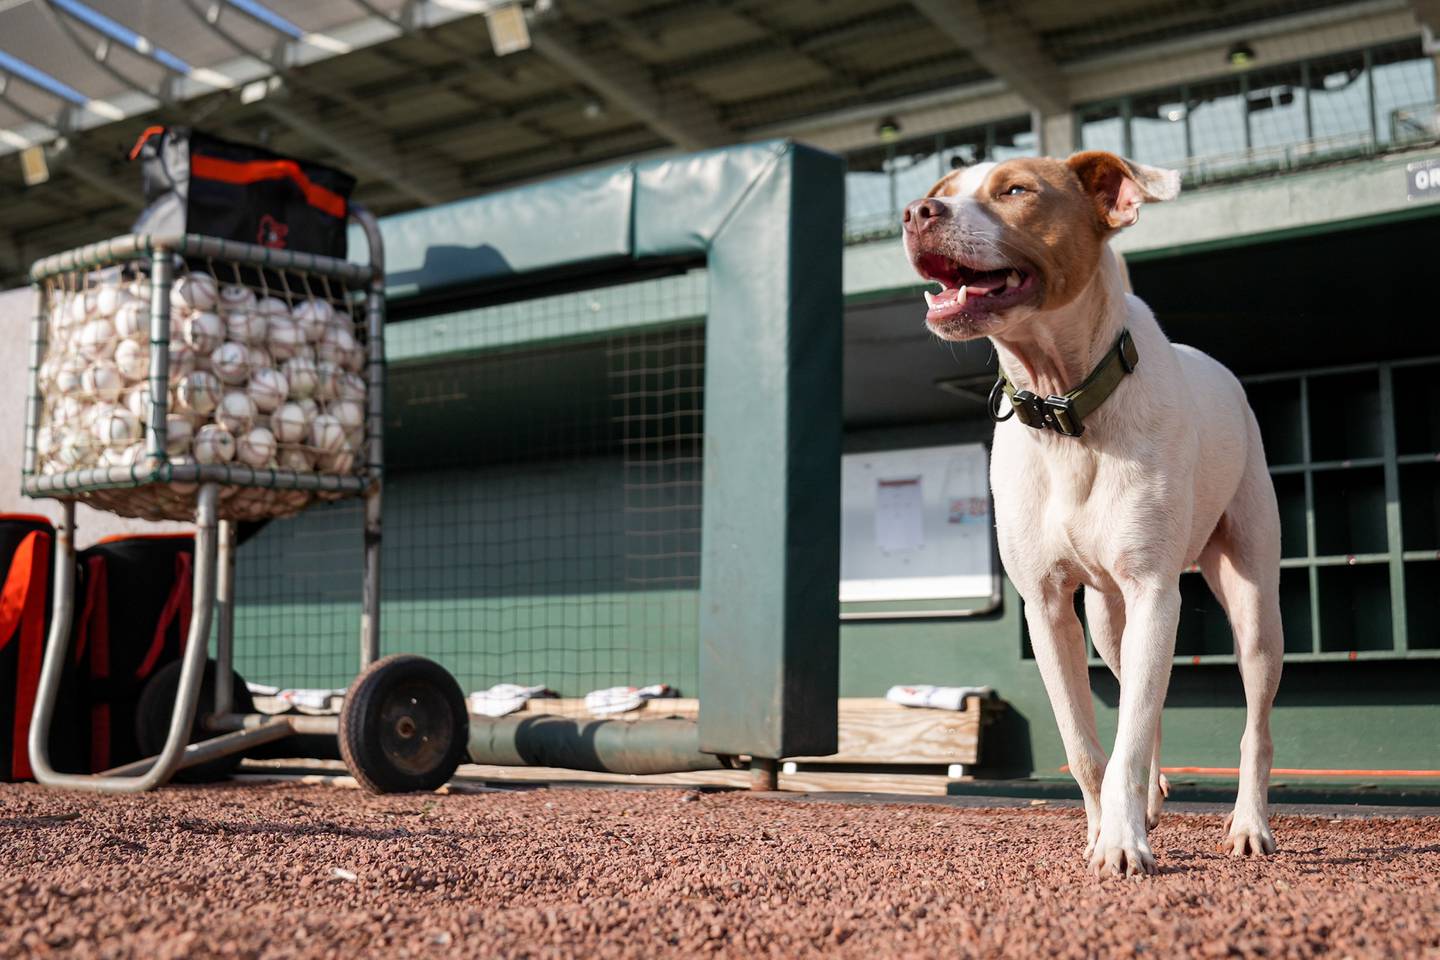 Thatch, groundskeeper Drew Wolcott’s dog, sprints out of the dugout and onto the warning track at Ed Smith Stadium on March 4. Thatch accompanies Wolcott every day as he and his crew work on the field.